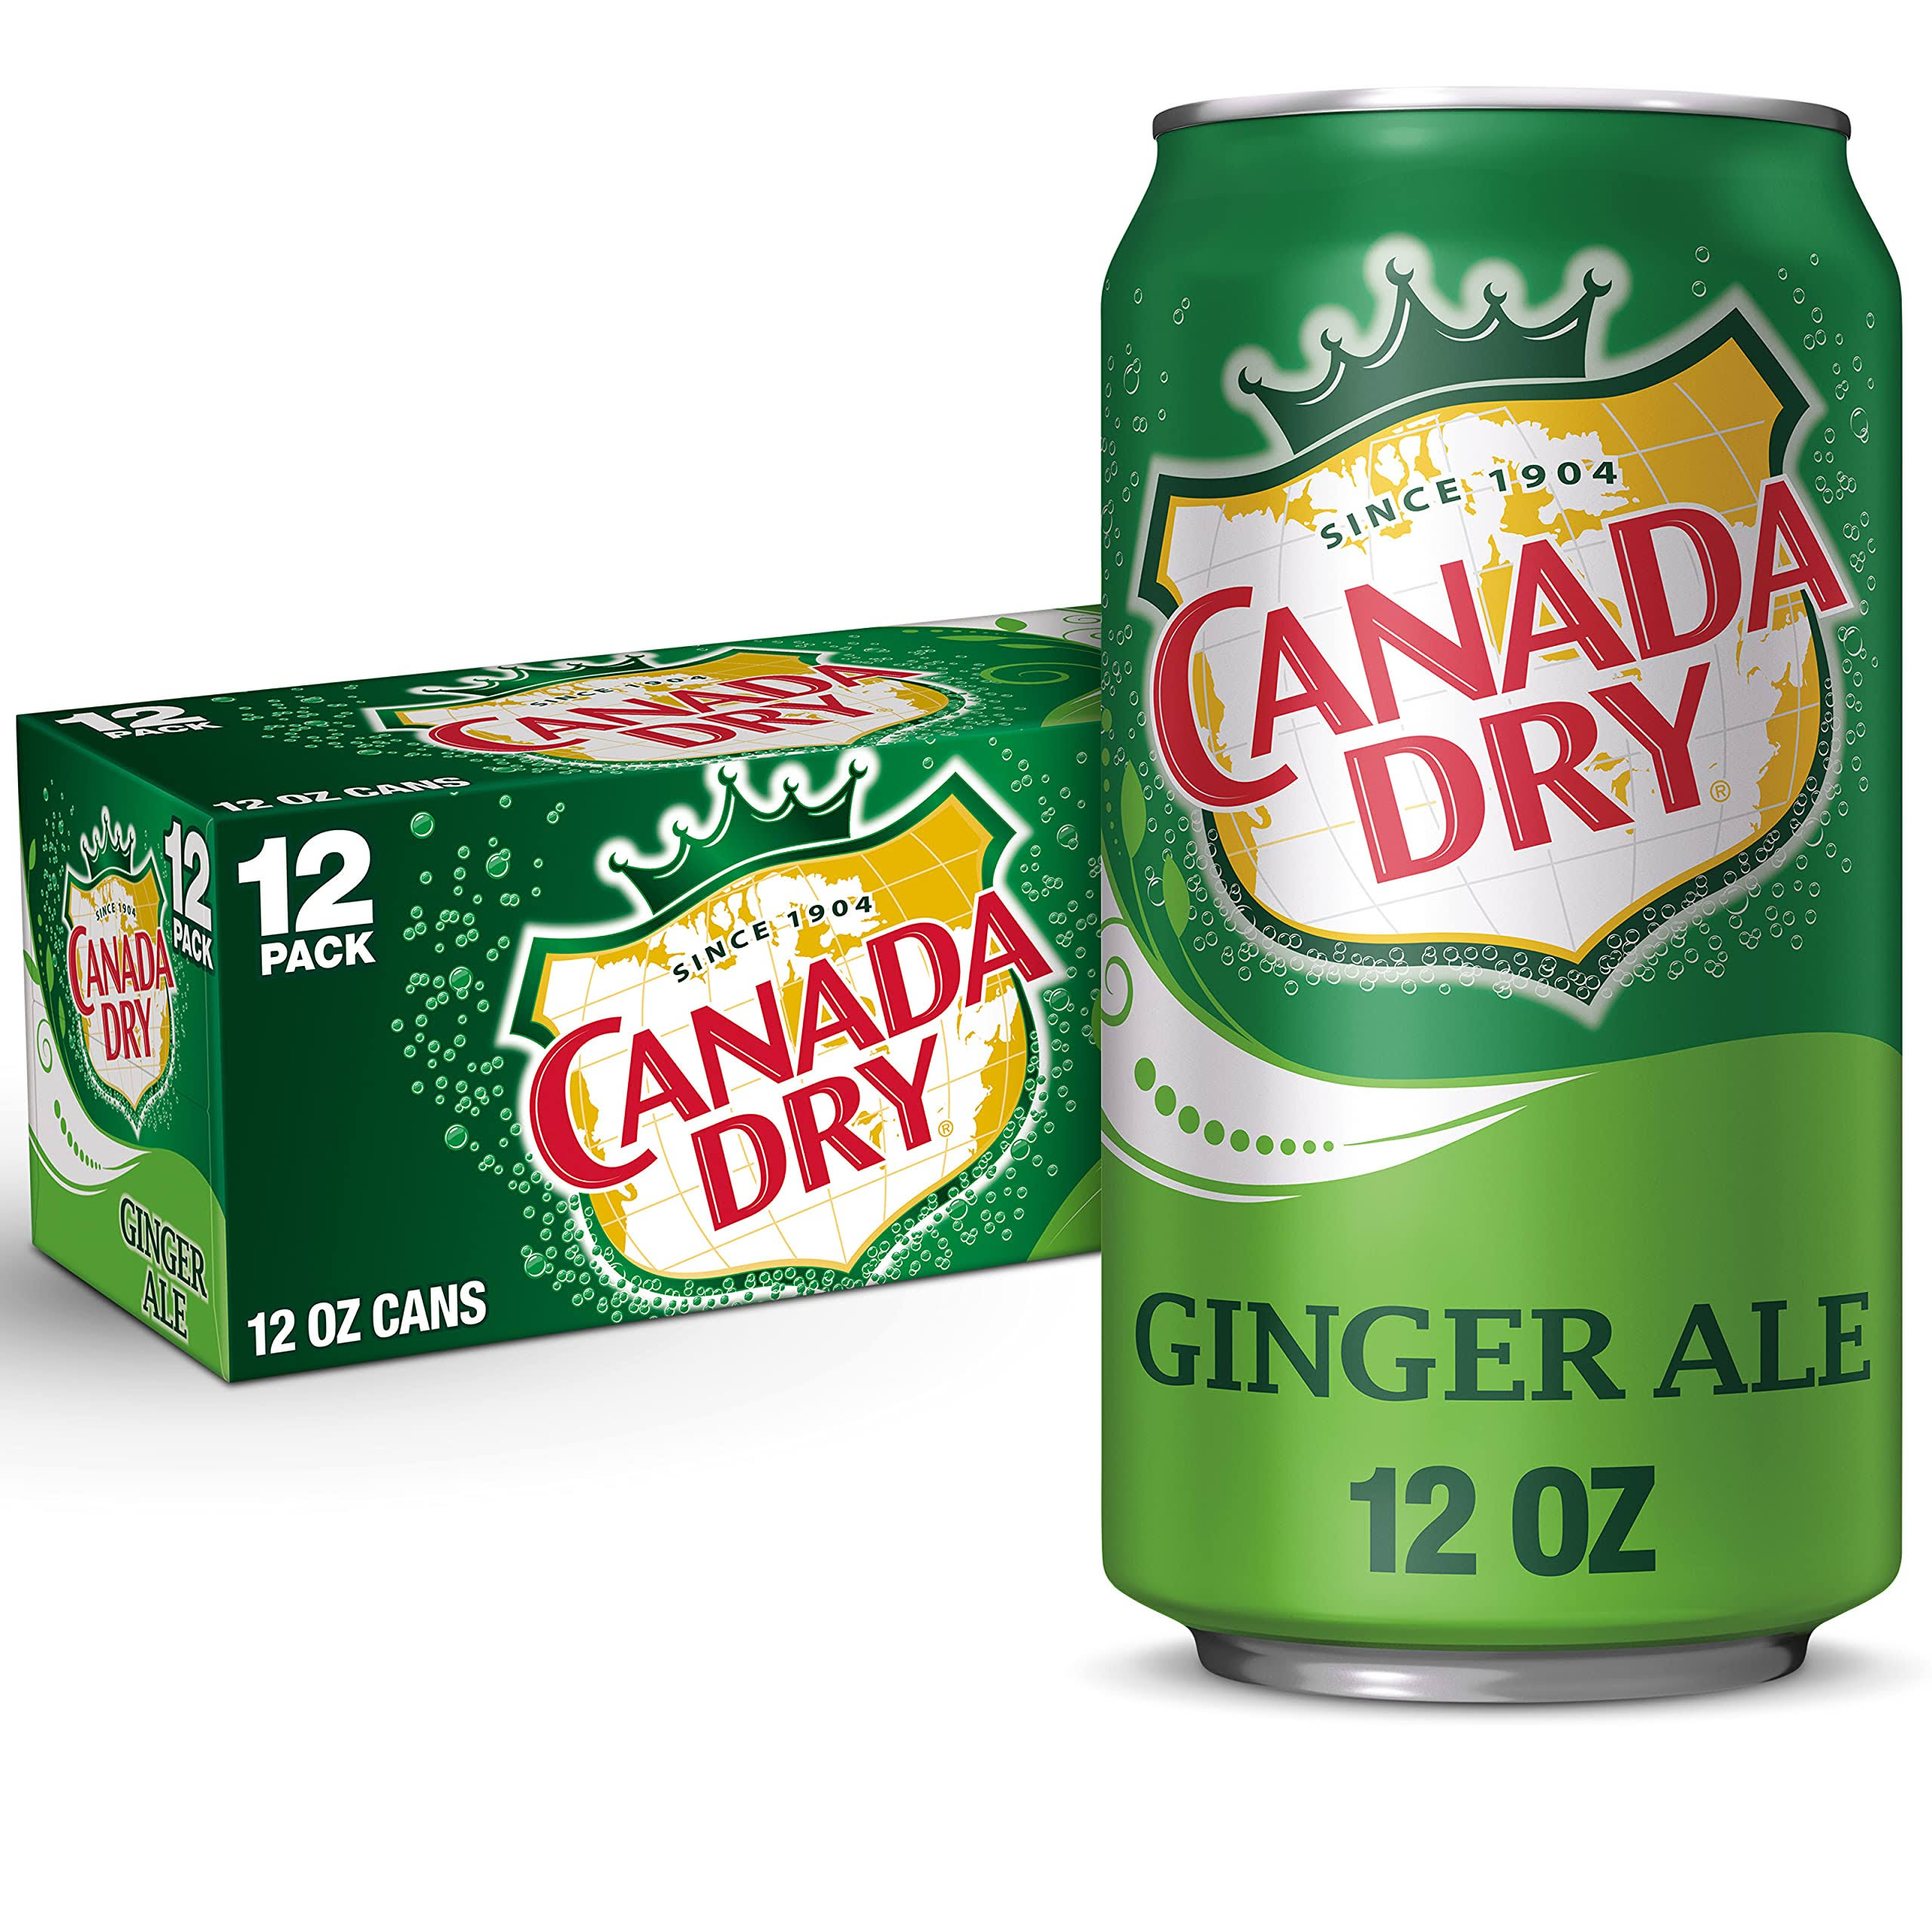 Canada Dry Ginger Ale - 12 ct